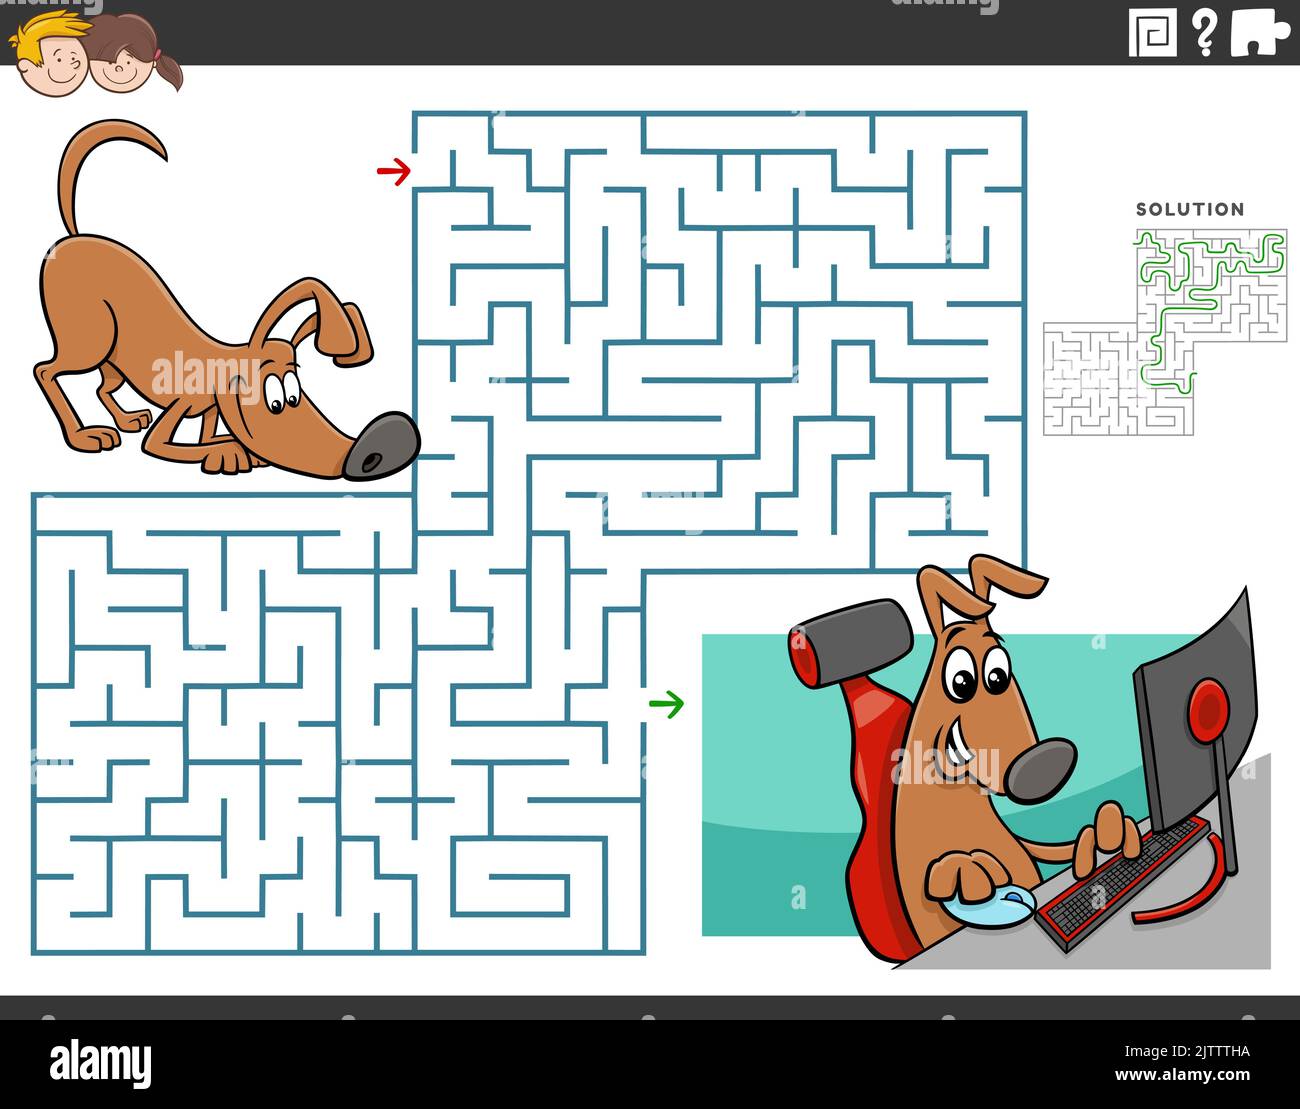 https://c8.alamy.com/comp/2JTTTHA/cartoon-illustration-of-educational-maze-puzzle-game-for-children-with-dog-playing-computer-games-2JTTTHA.jpg